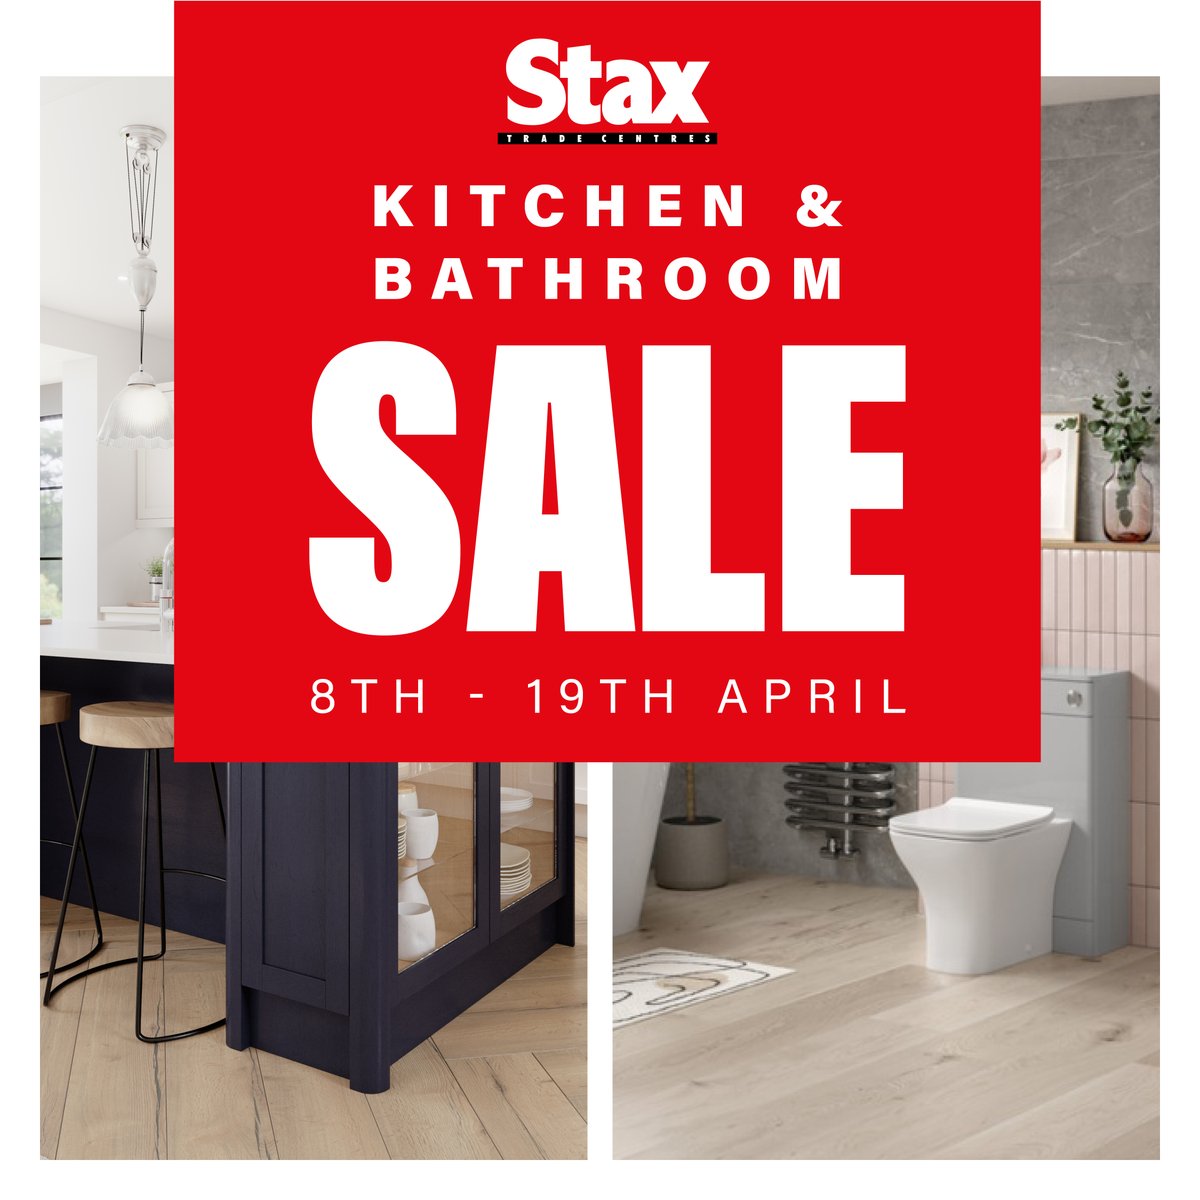 Have you checked out our amazing KITCHEN & BATHROOM SALE?

We have offers on a vast number of trade approved quality kitchens and bathrooms until the 19th April!!

Head online or to your local Stax branch TODAY brnw.ch/21wITDZ

#StaxTradeCentres